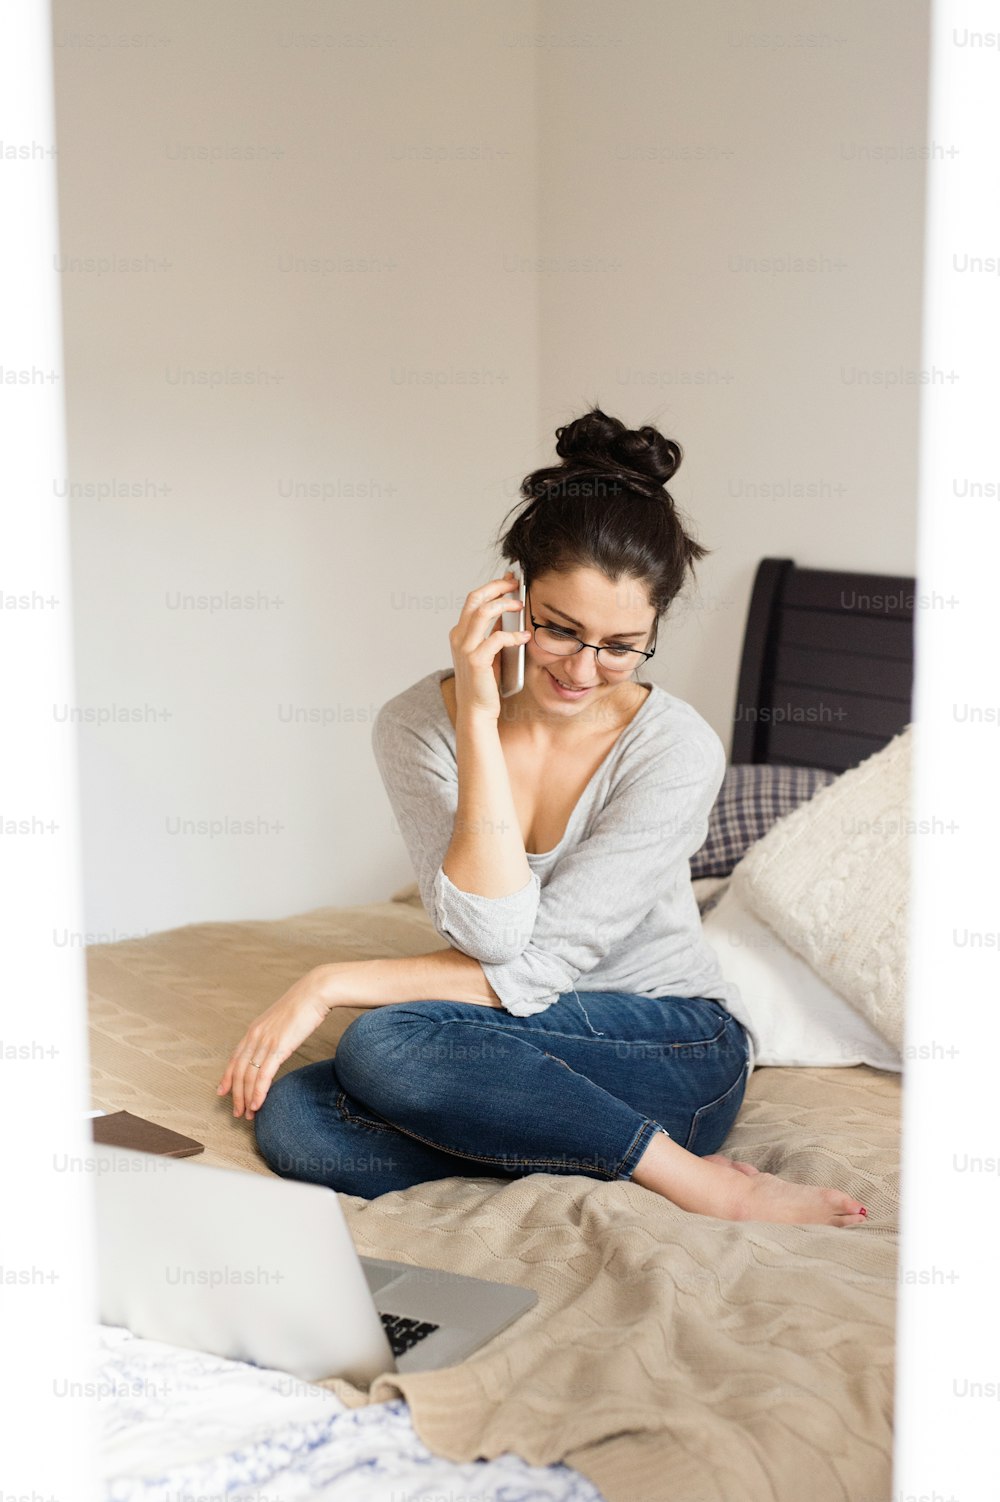 Beautiful young woman wearing eyeglasses sitting on bed, notebook next to her, holding smart phone, making a phone call, home office.